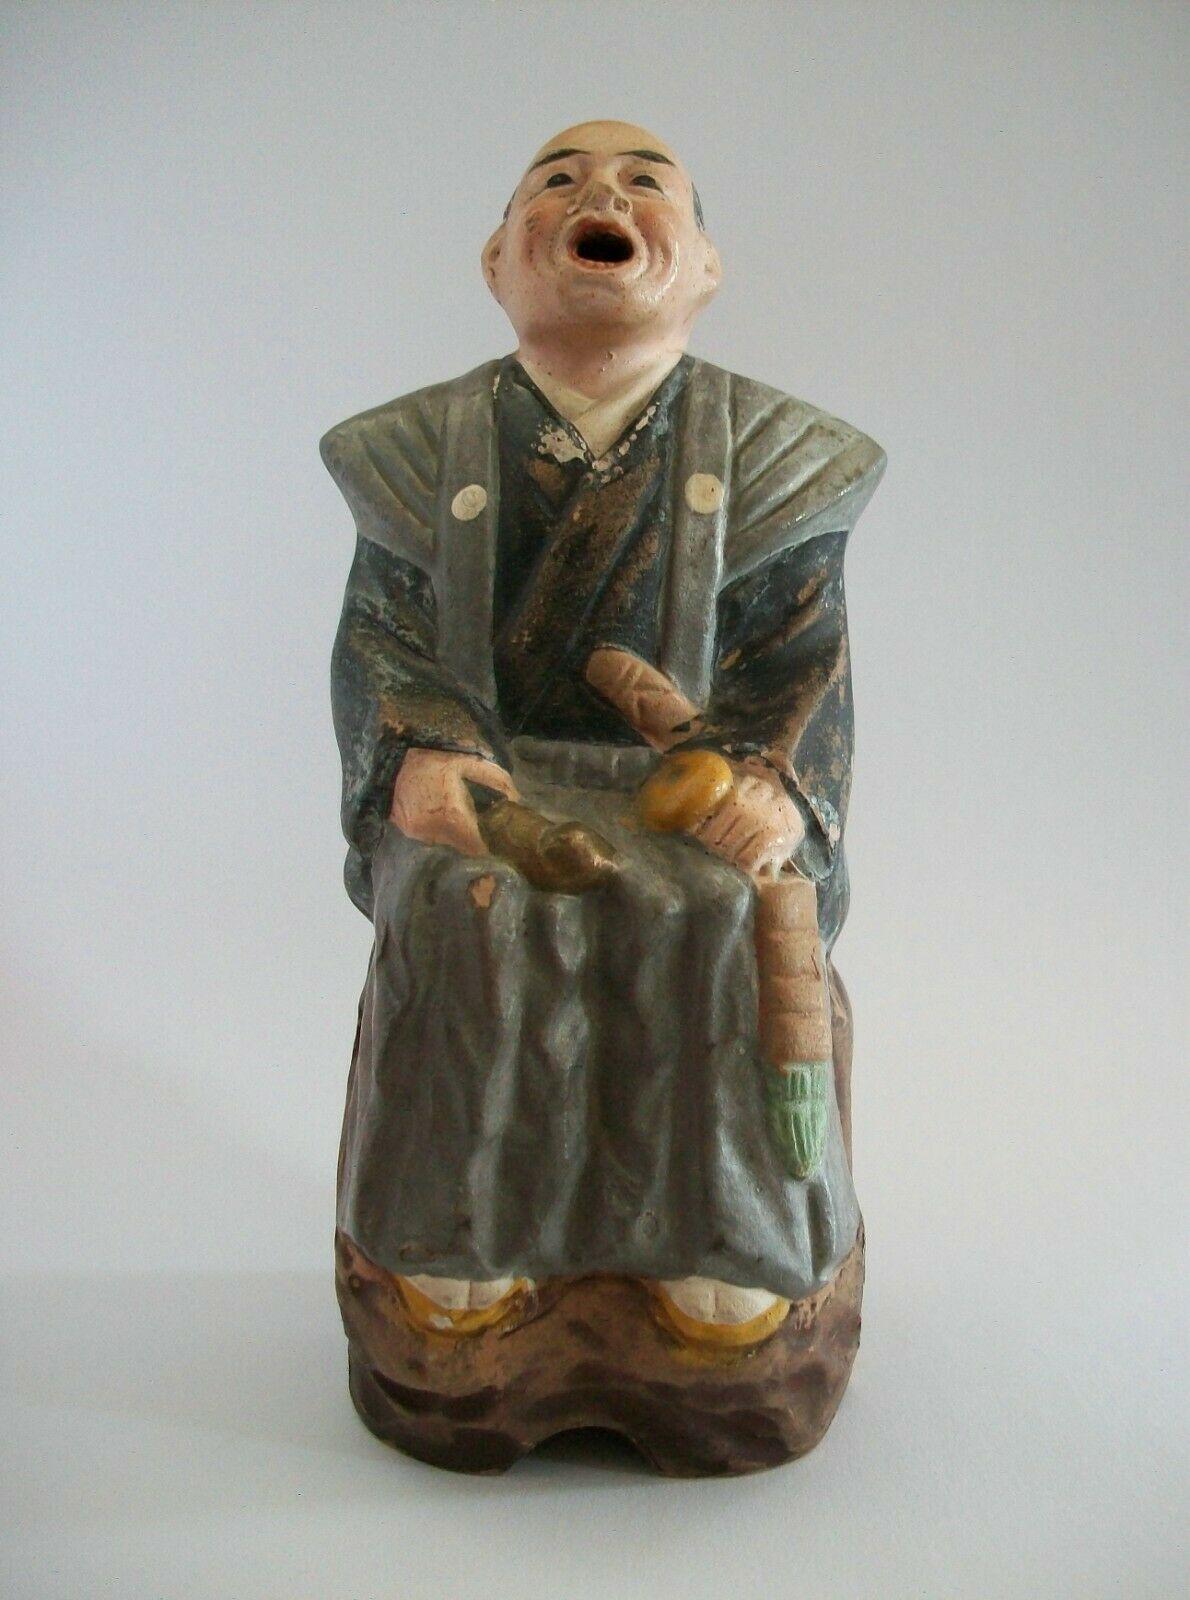 Taoist Yixing Zisha clay 'priest or scholar' figure - cold painted - good detail - unsigned - China - 20th century.

Good vintage condition - chips and loss to the nose and one shoulder with minor chips near the base - no apparent restoration -